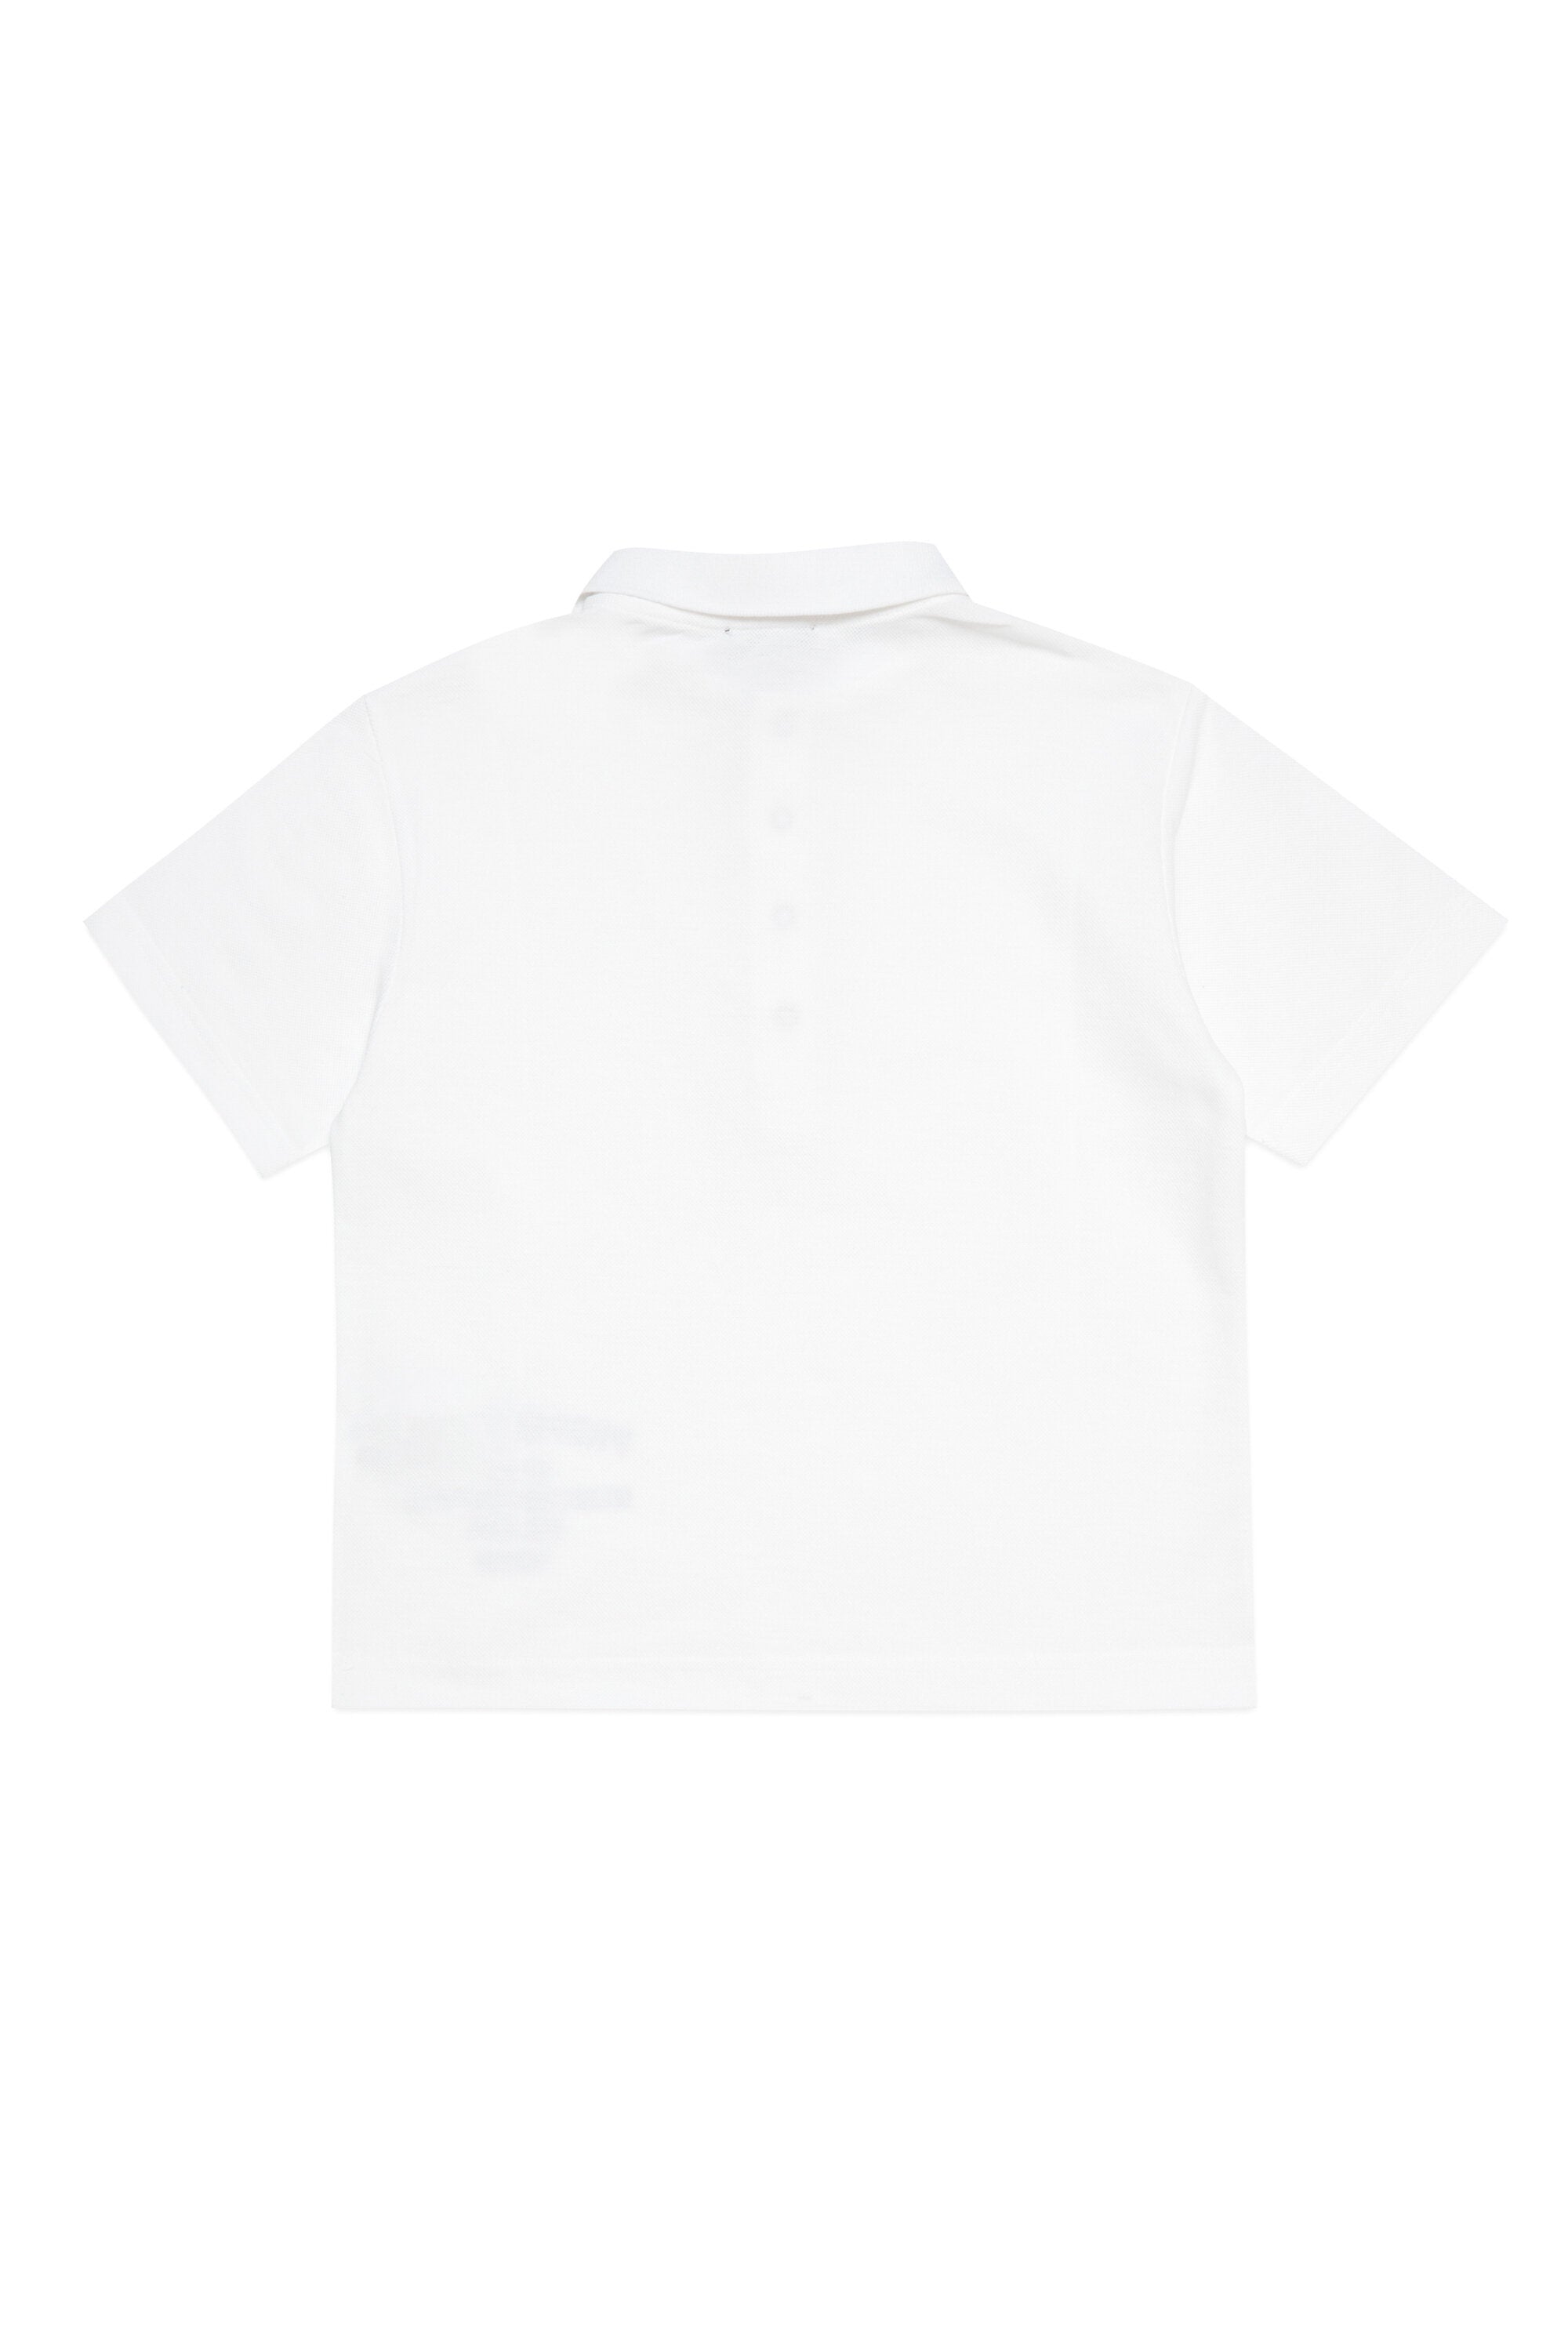 Property of N°21 branded polo shirt